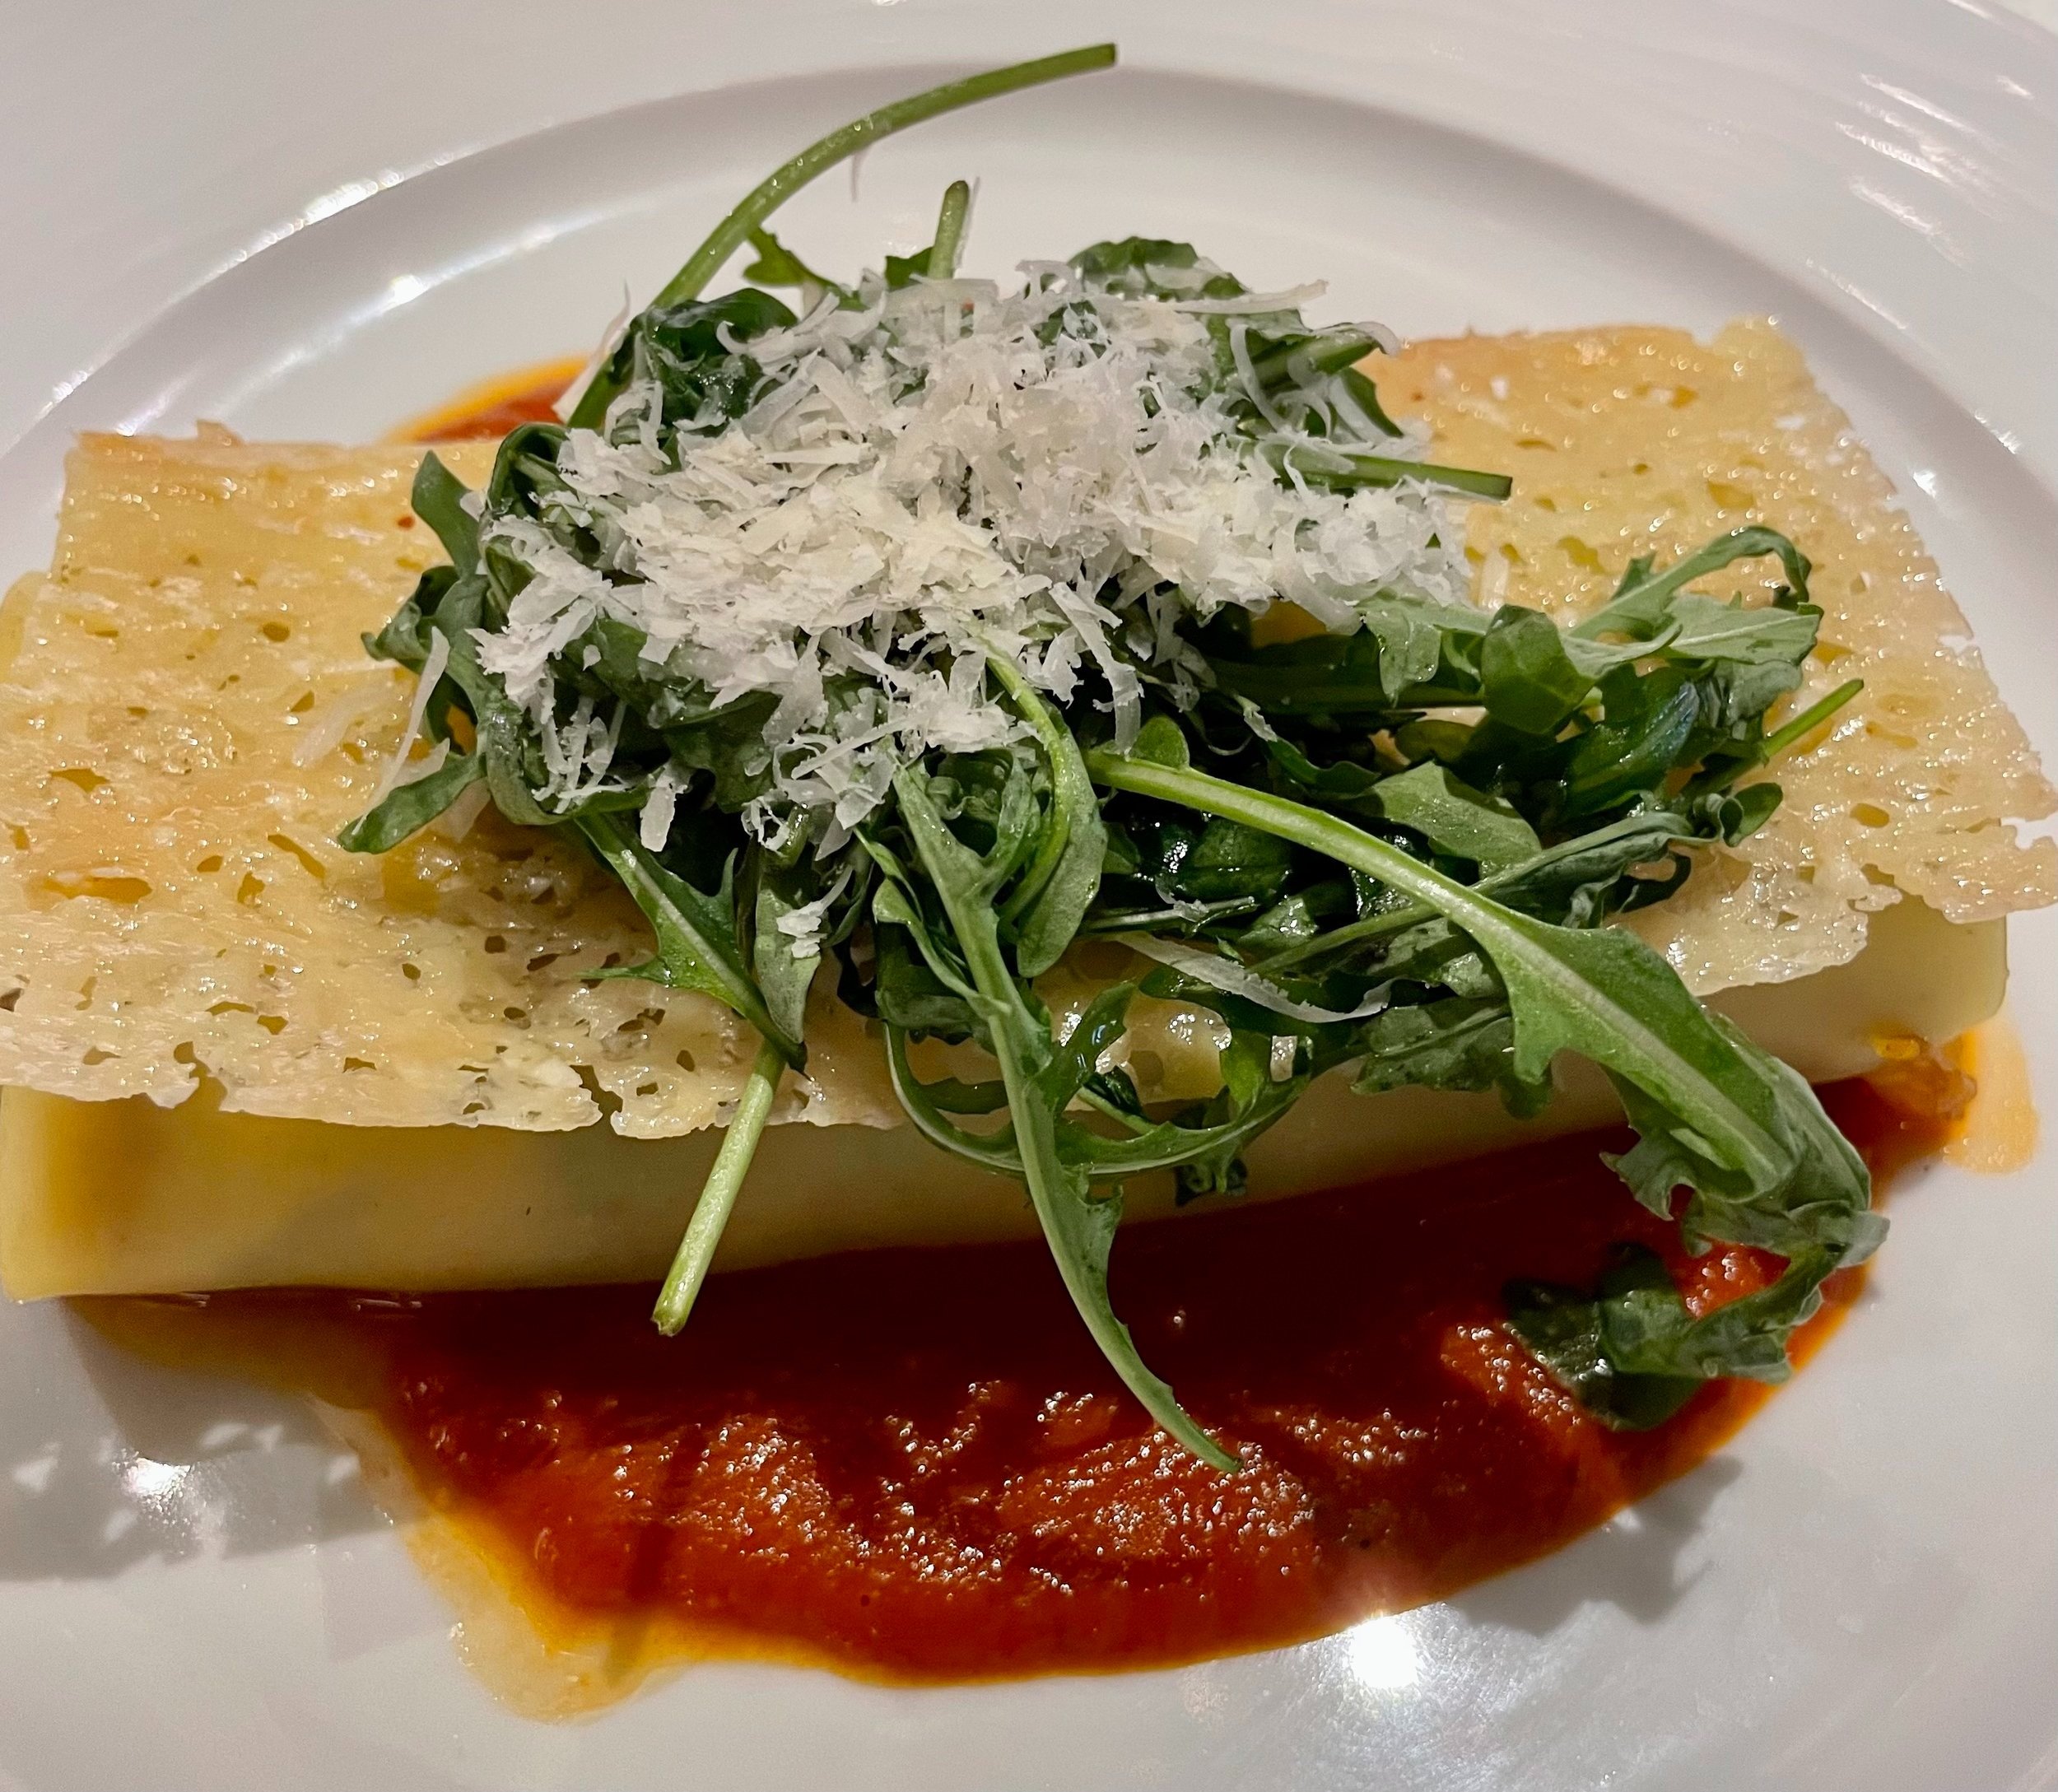  The vegetarian main - eggplant cannelloni with a parmesan crisp 